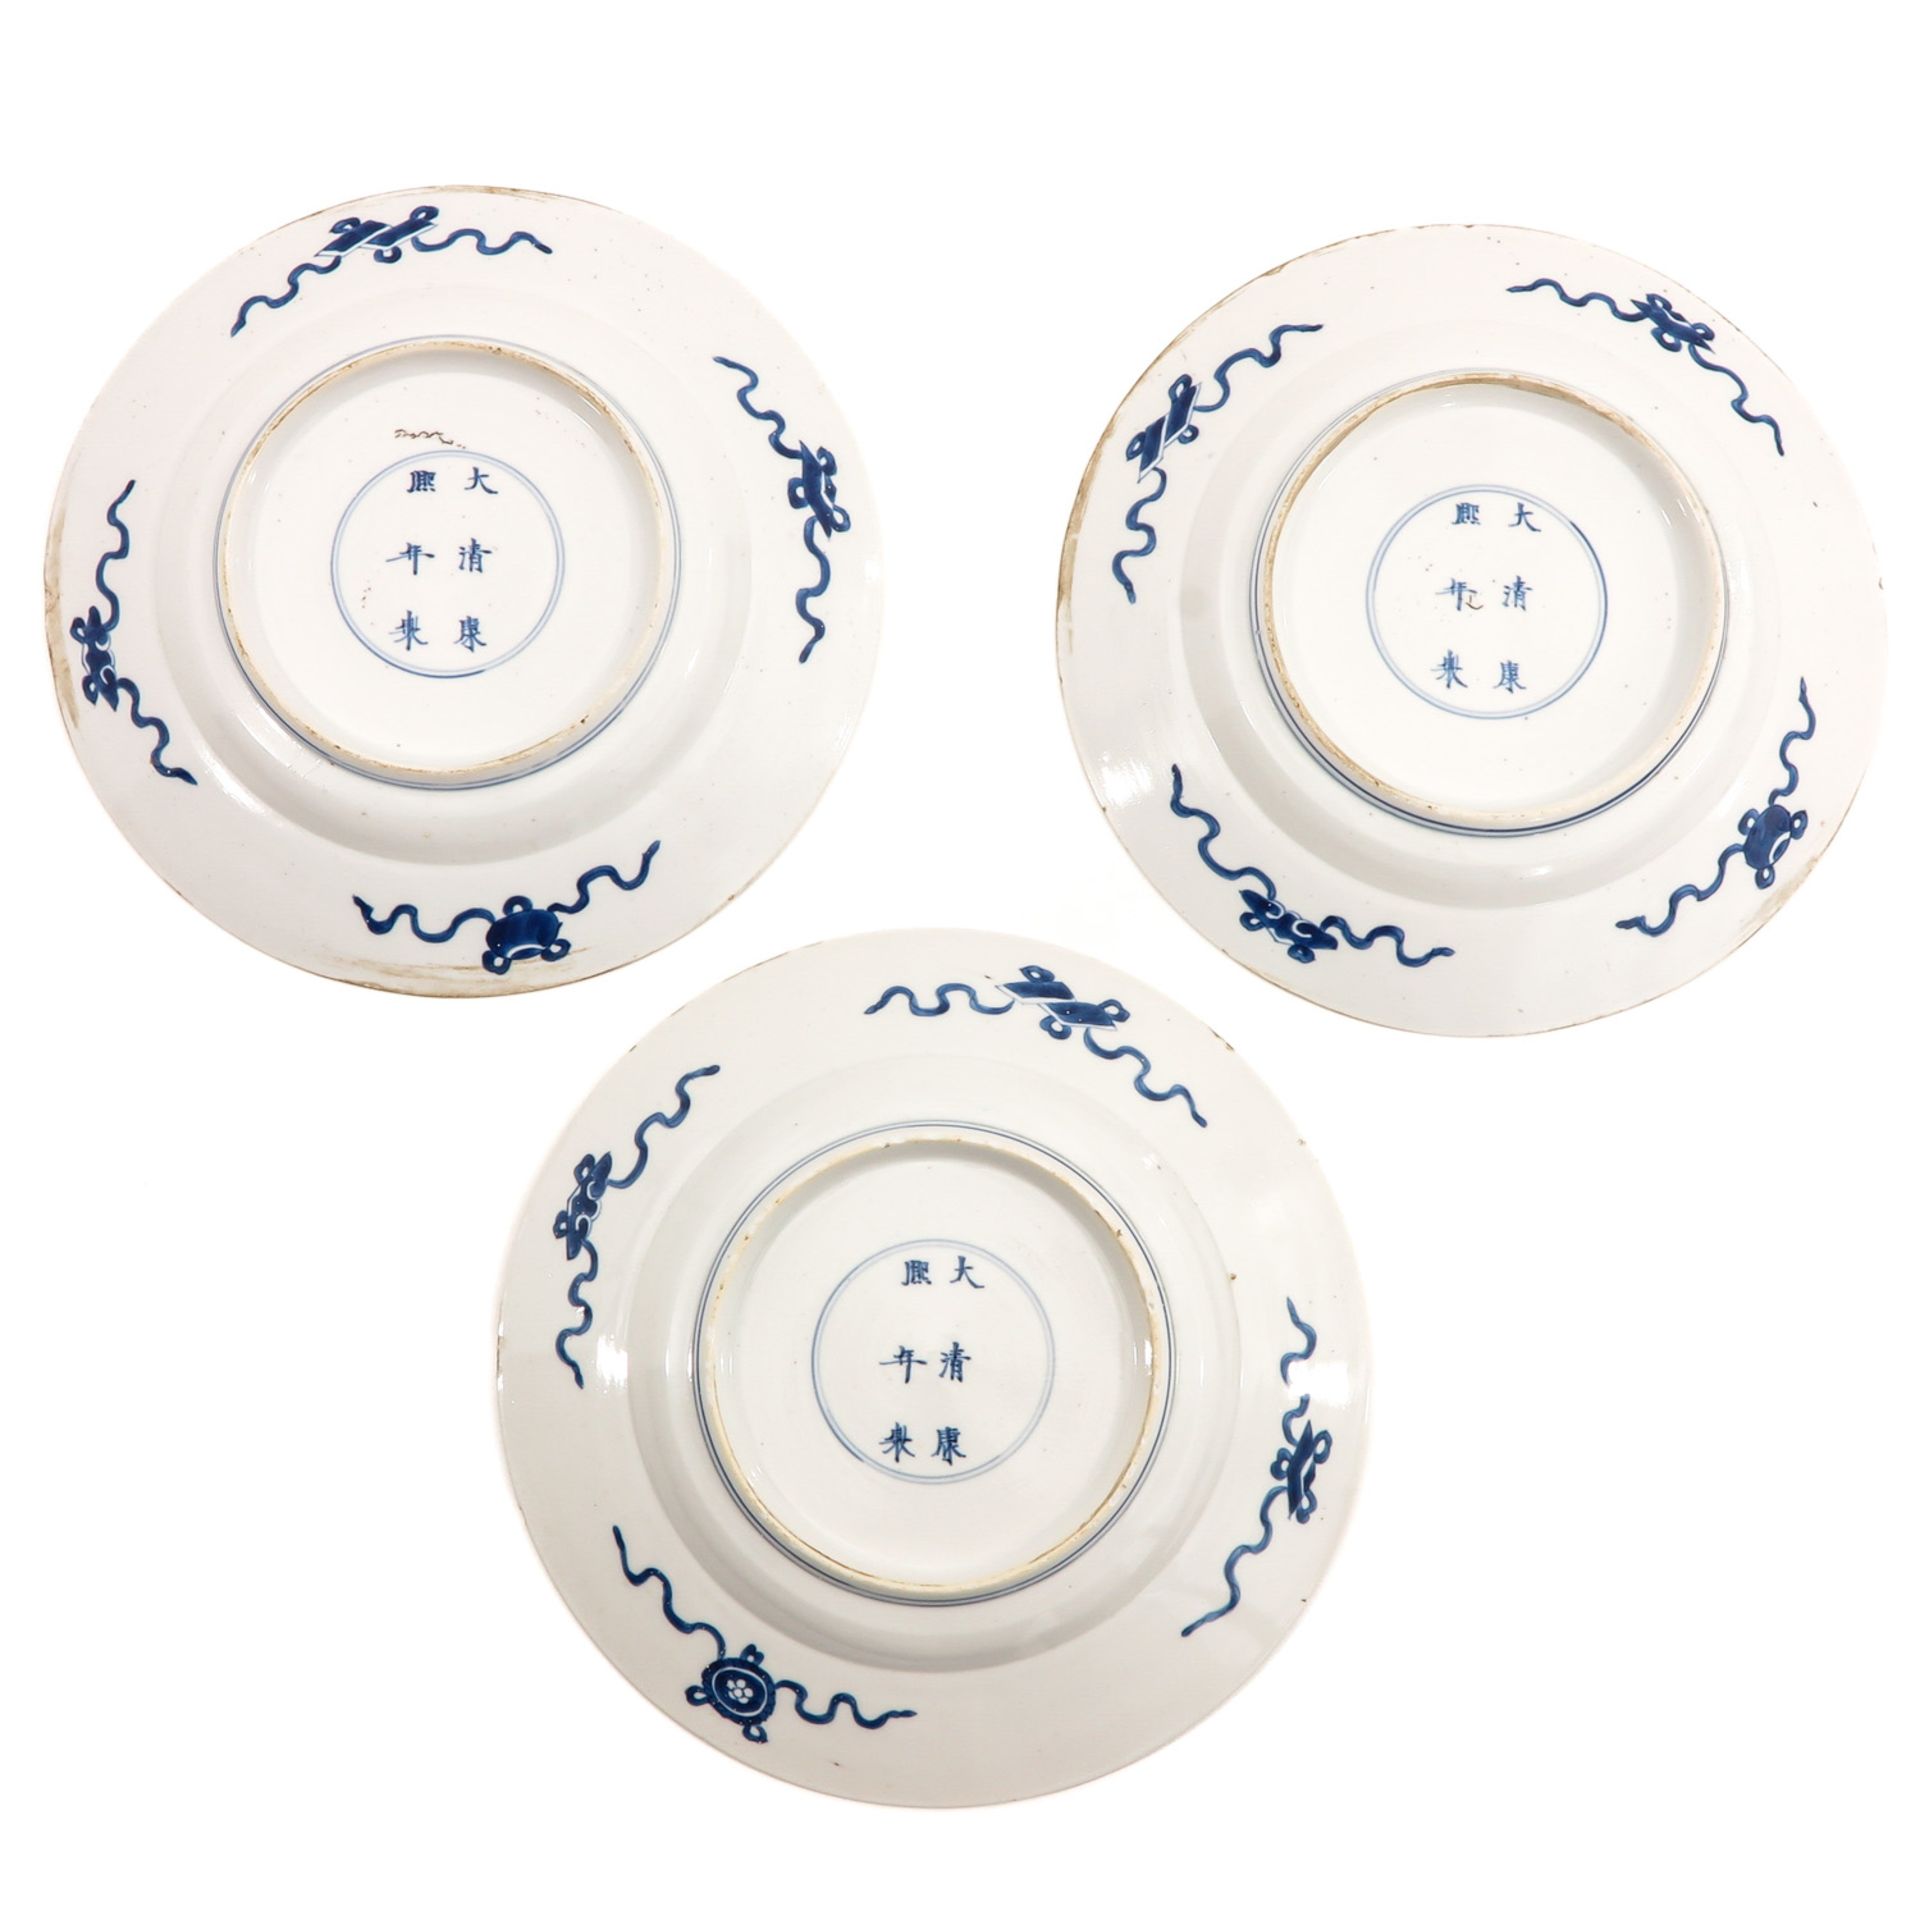 A Series of 5 Blue and White Plates - Image 4 of 10